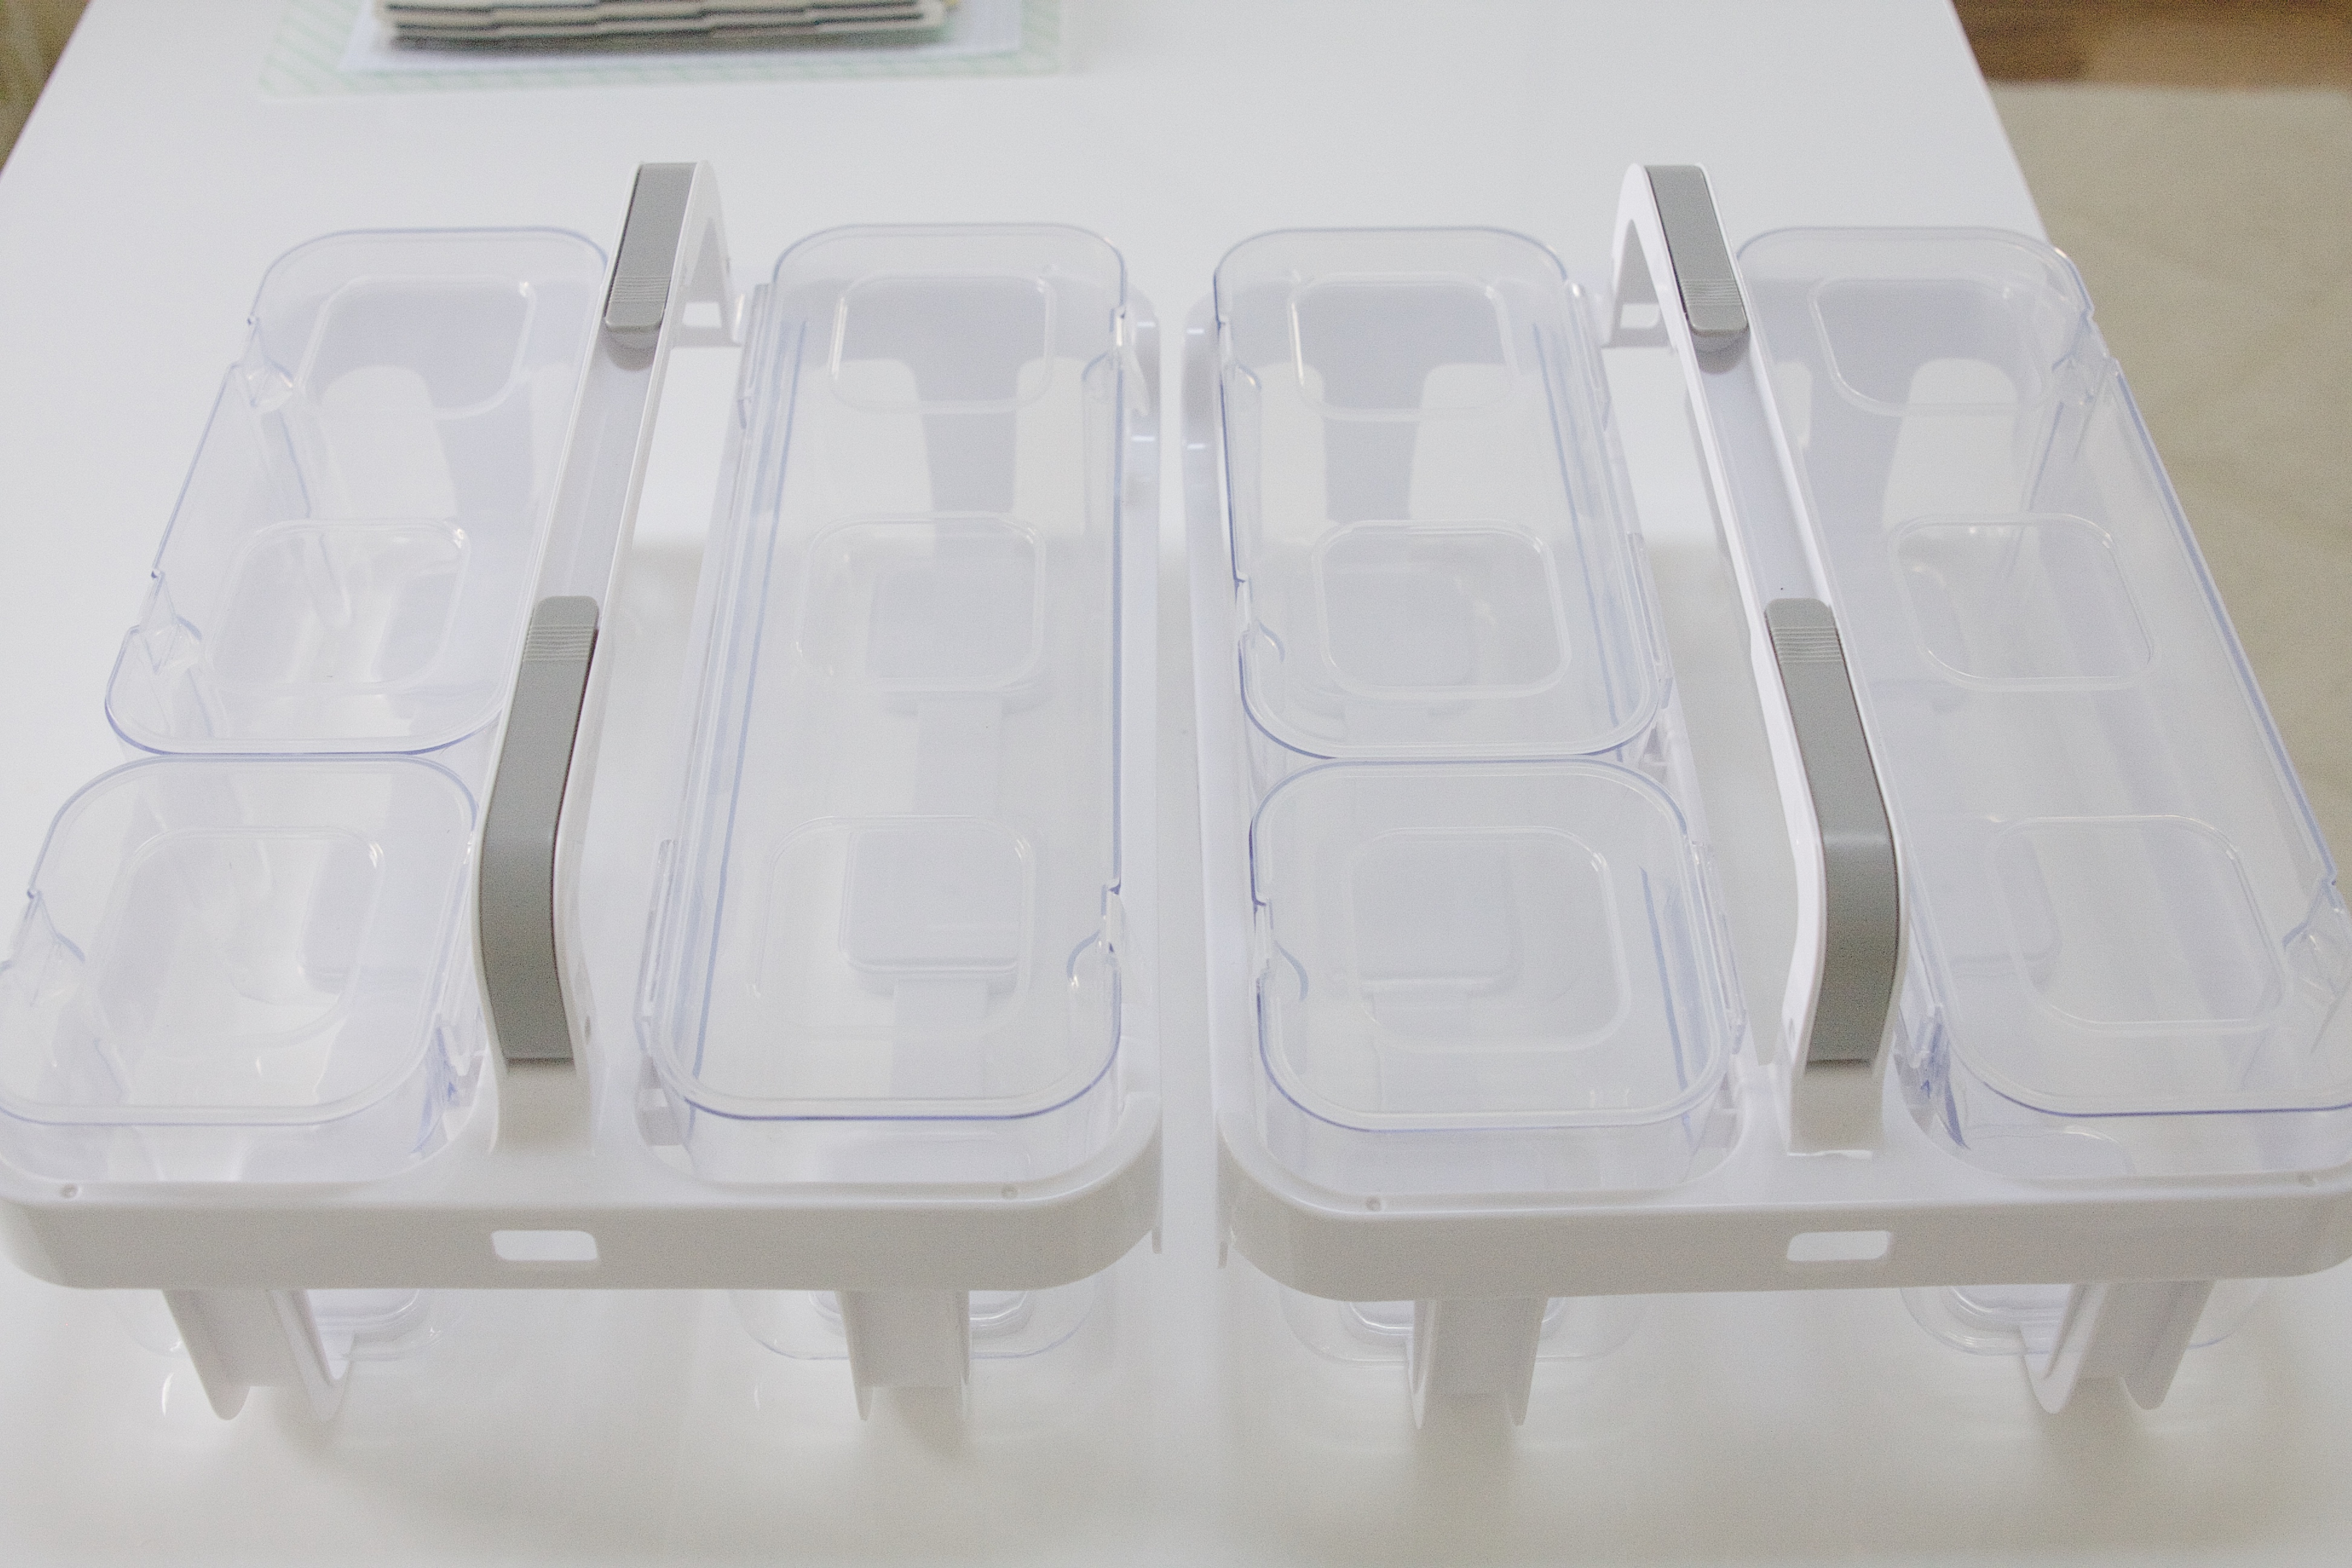 Deflecto Stackable Caddy Organizer Containers Medium Clear